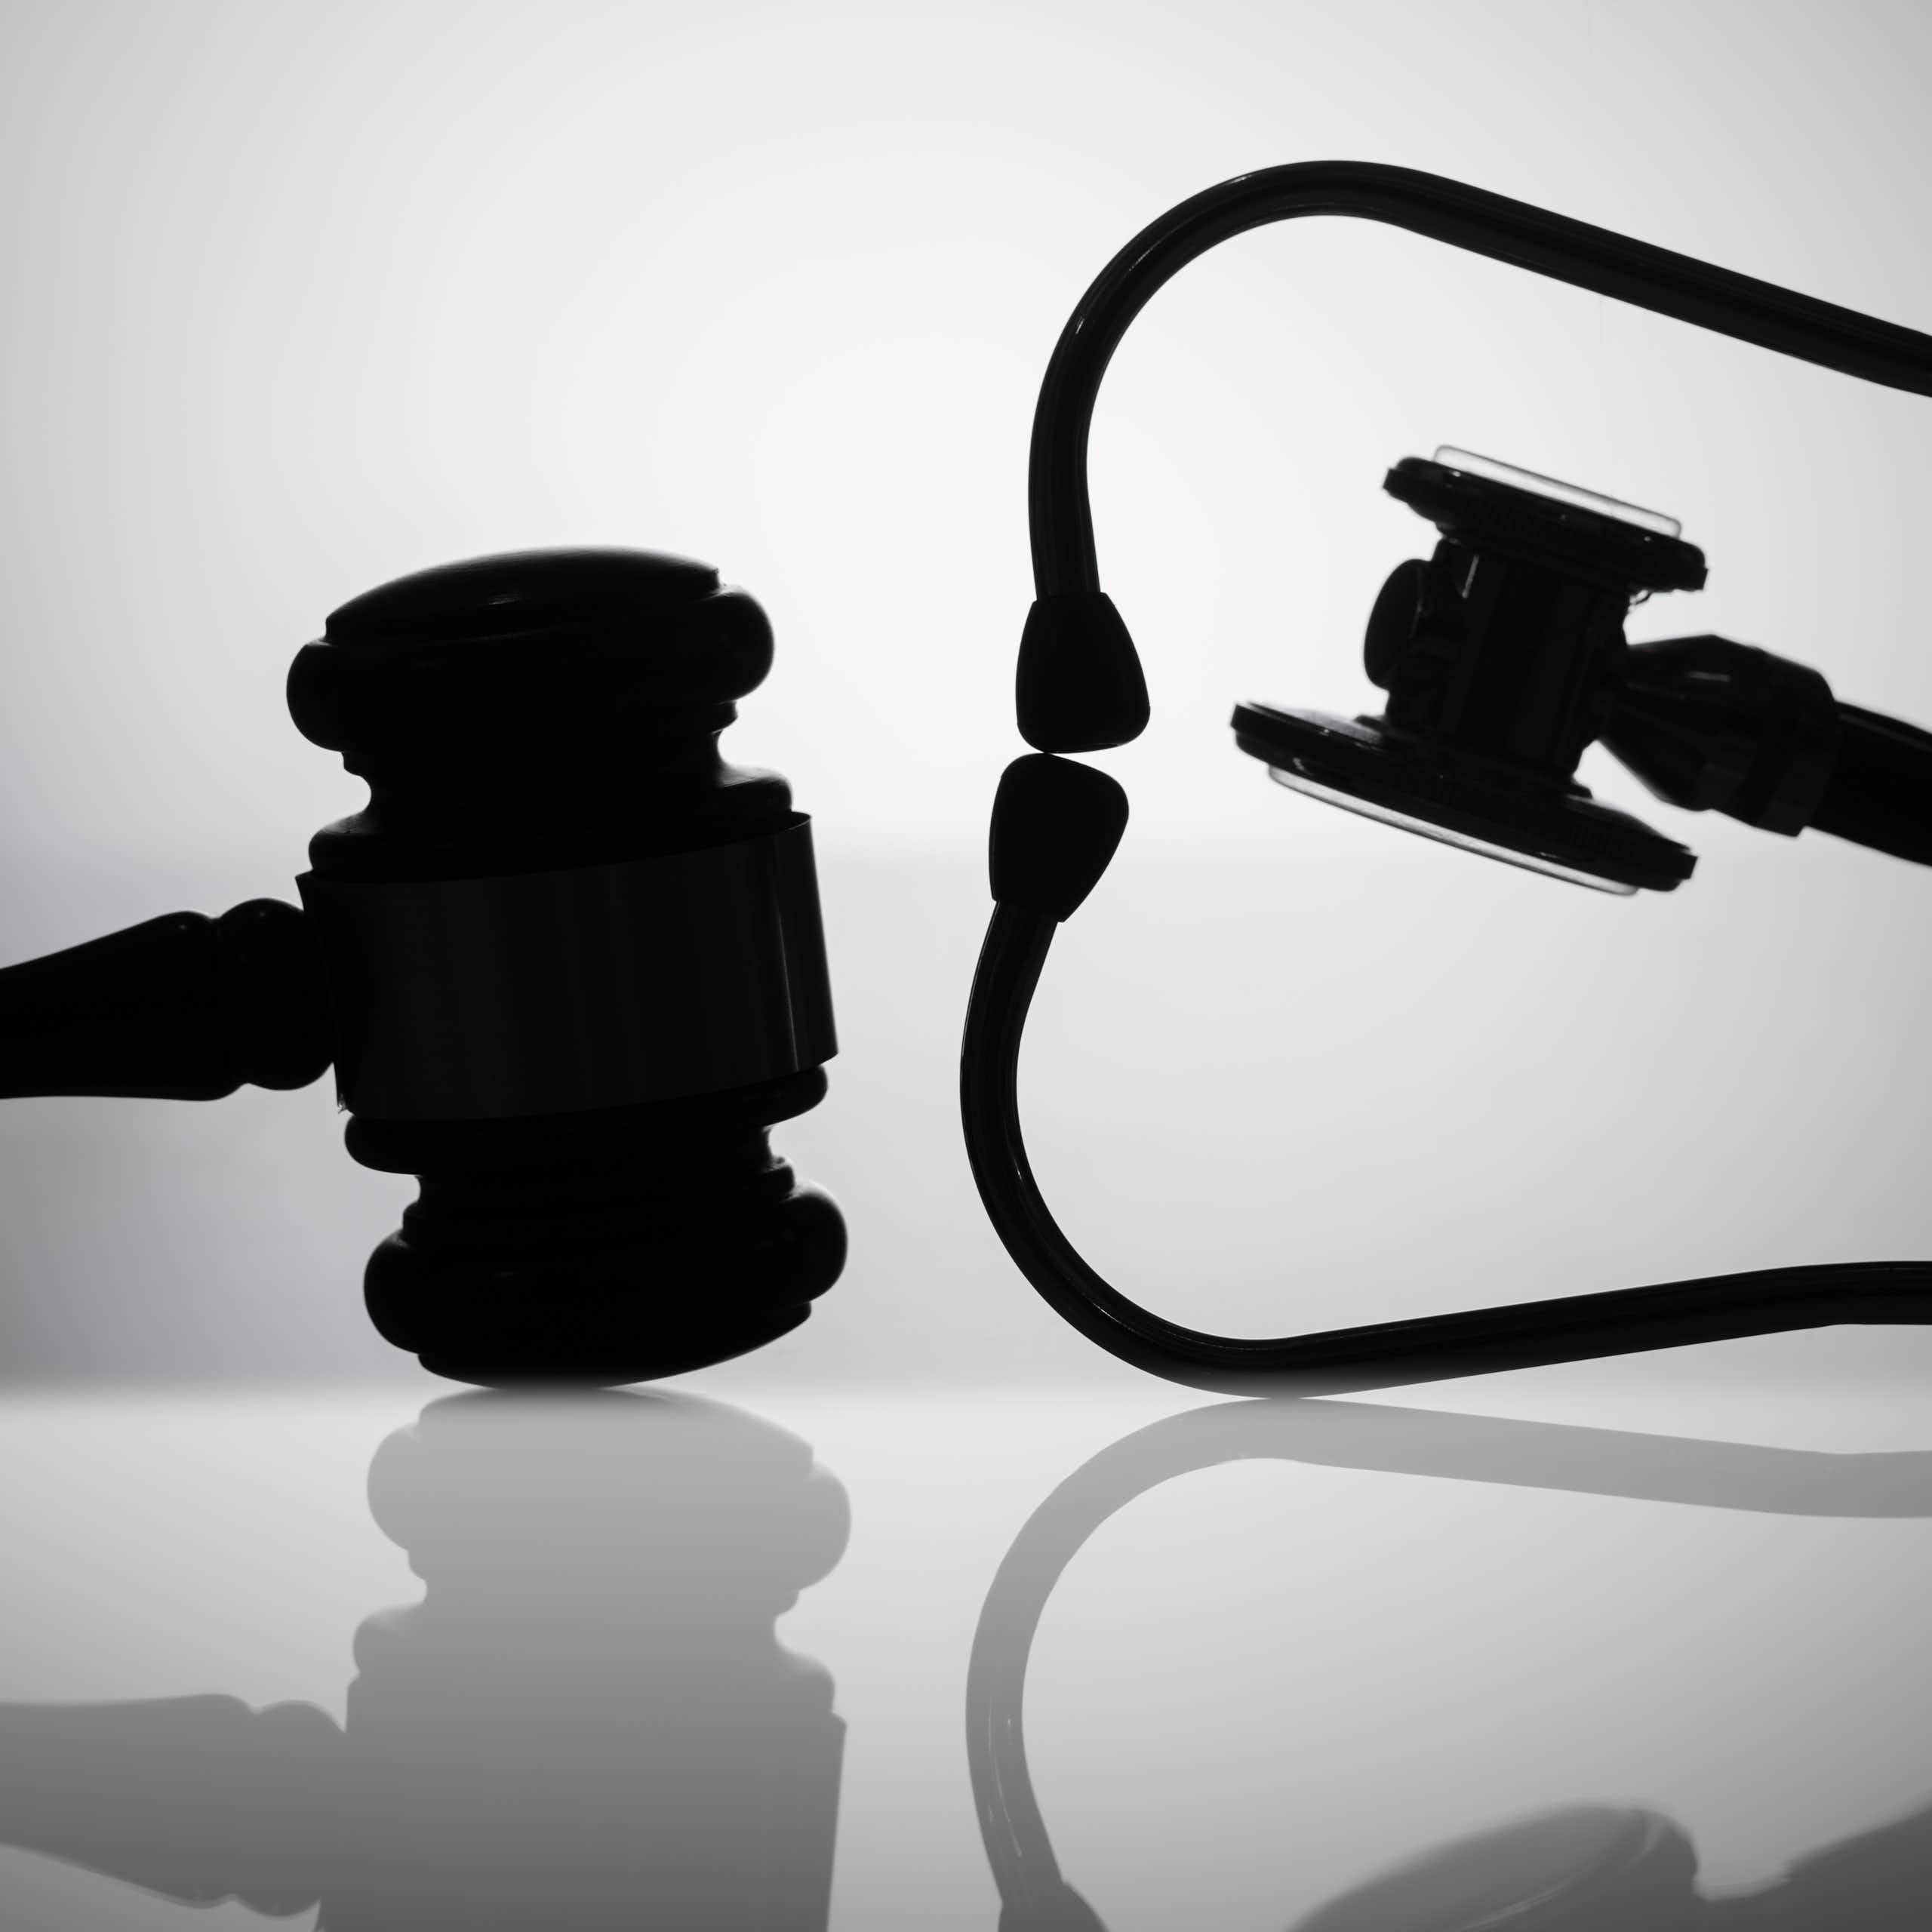 Silhouettes of a judge's gavel and a stethoscope.